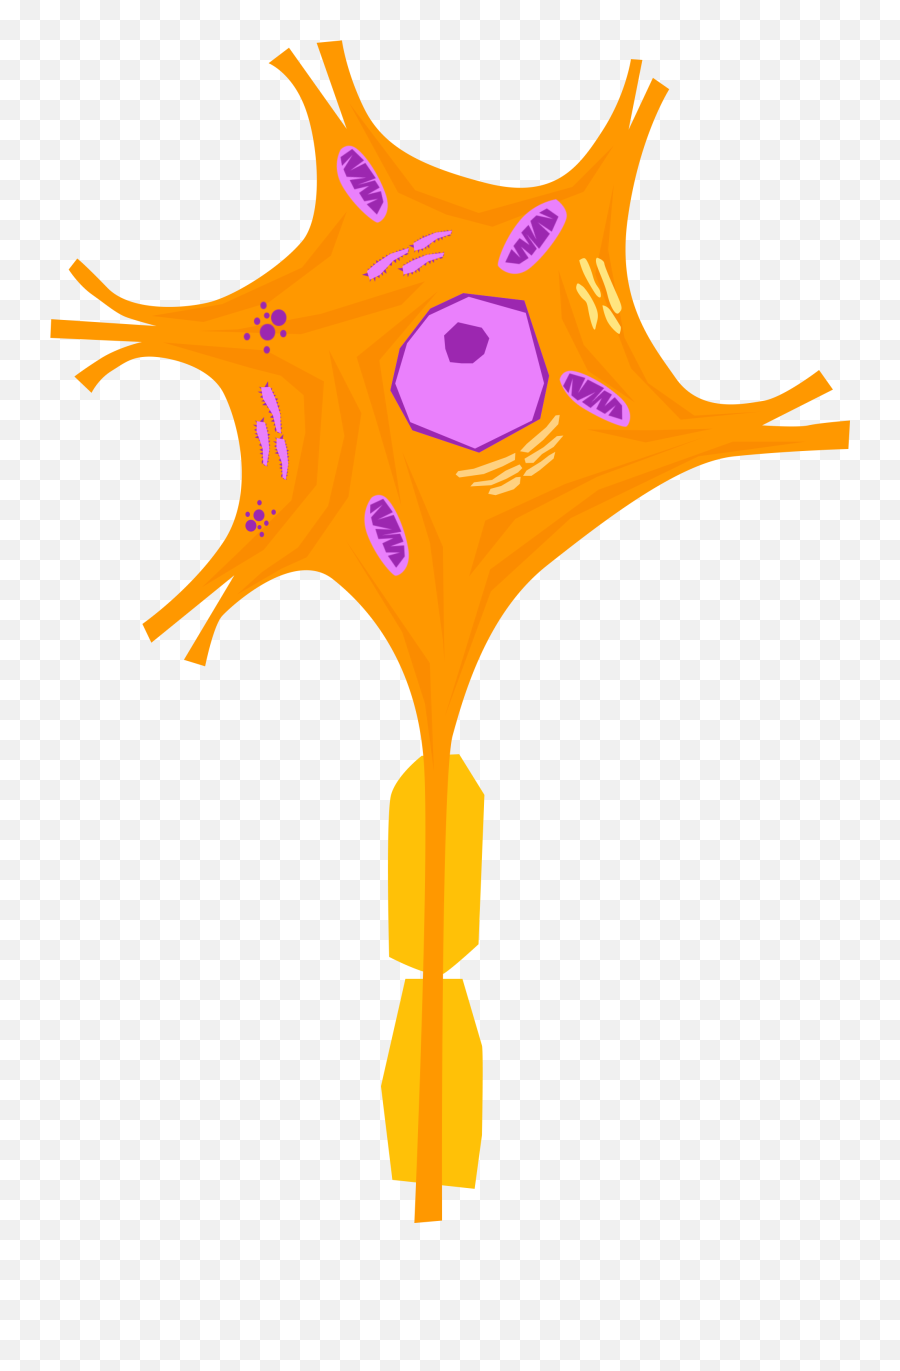 Neurons - Small Picture Of Neurons Emoji,Emoticons For Muelin